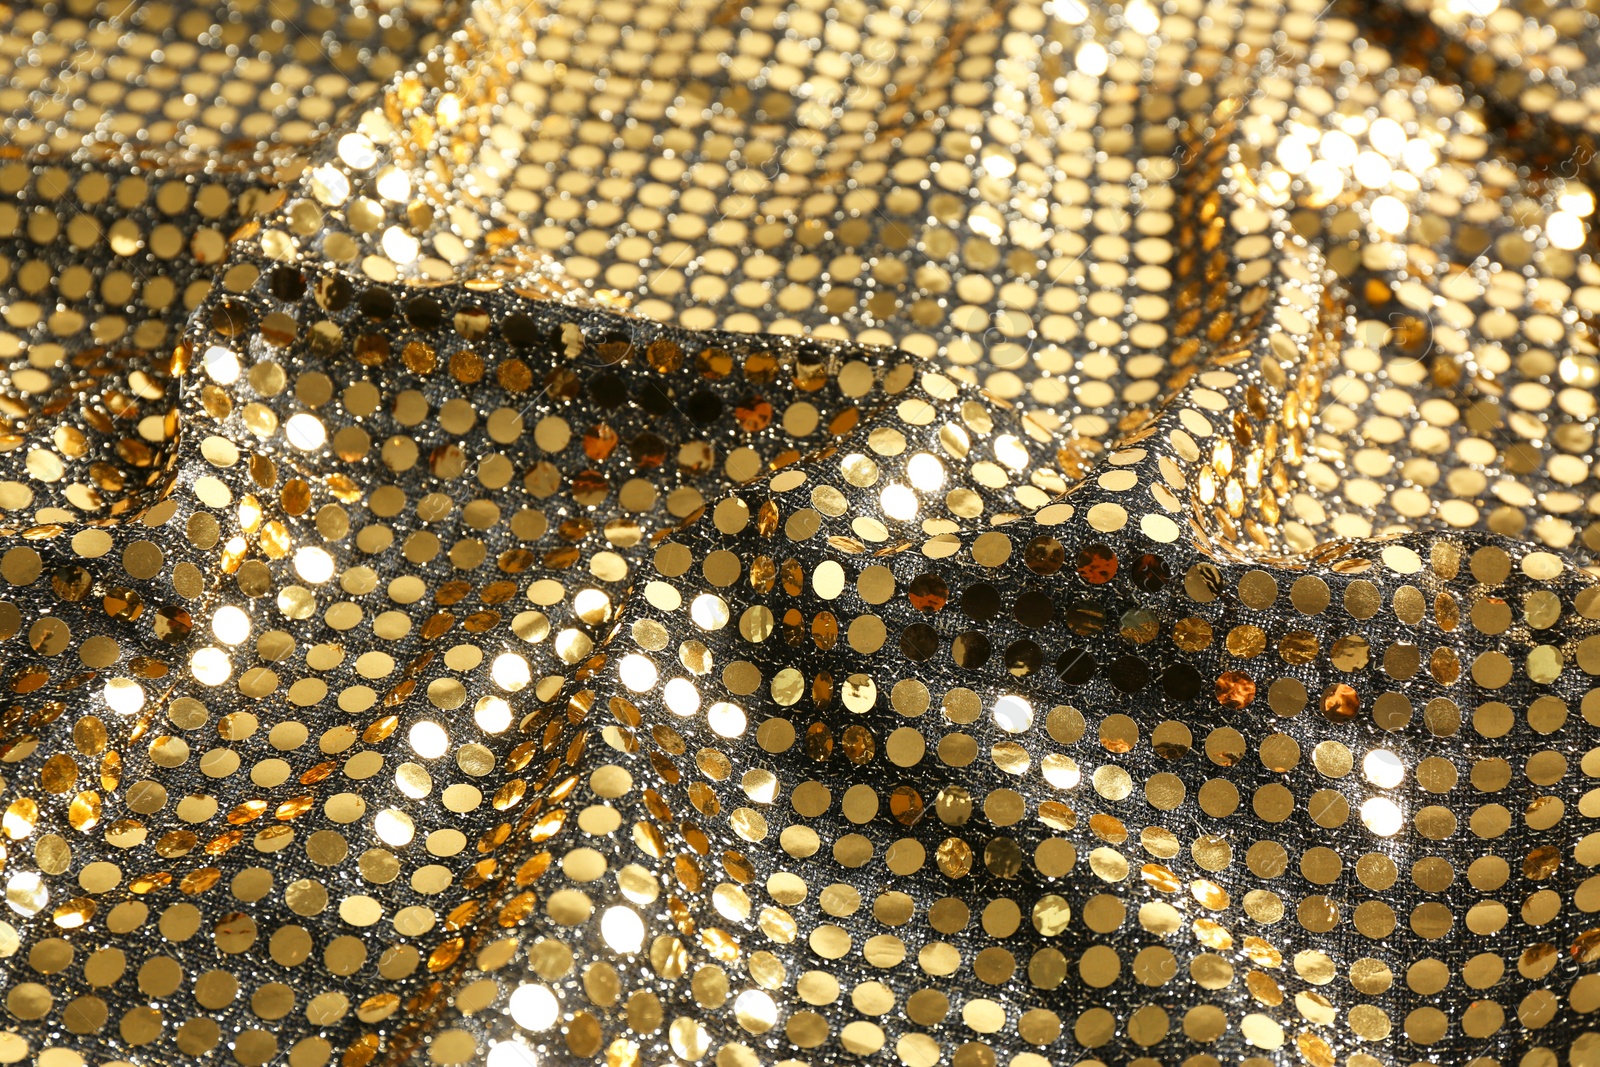 Photo of Closeup view of golden shiny sequin fabric as background